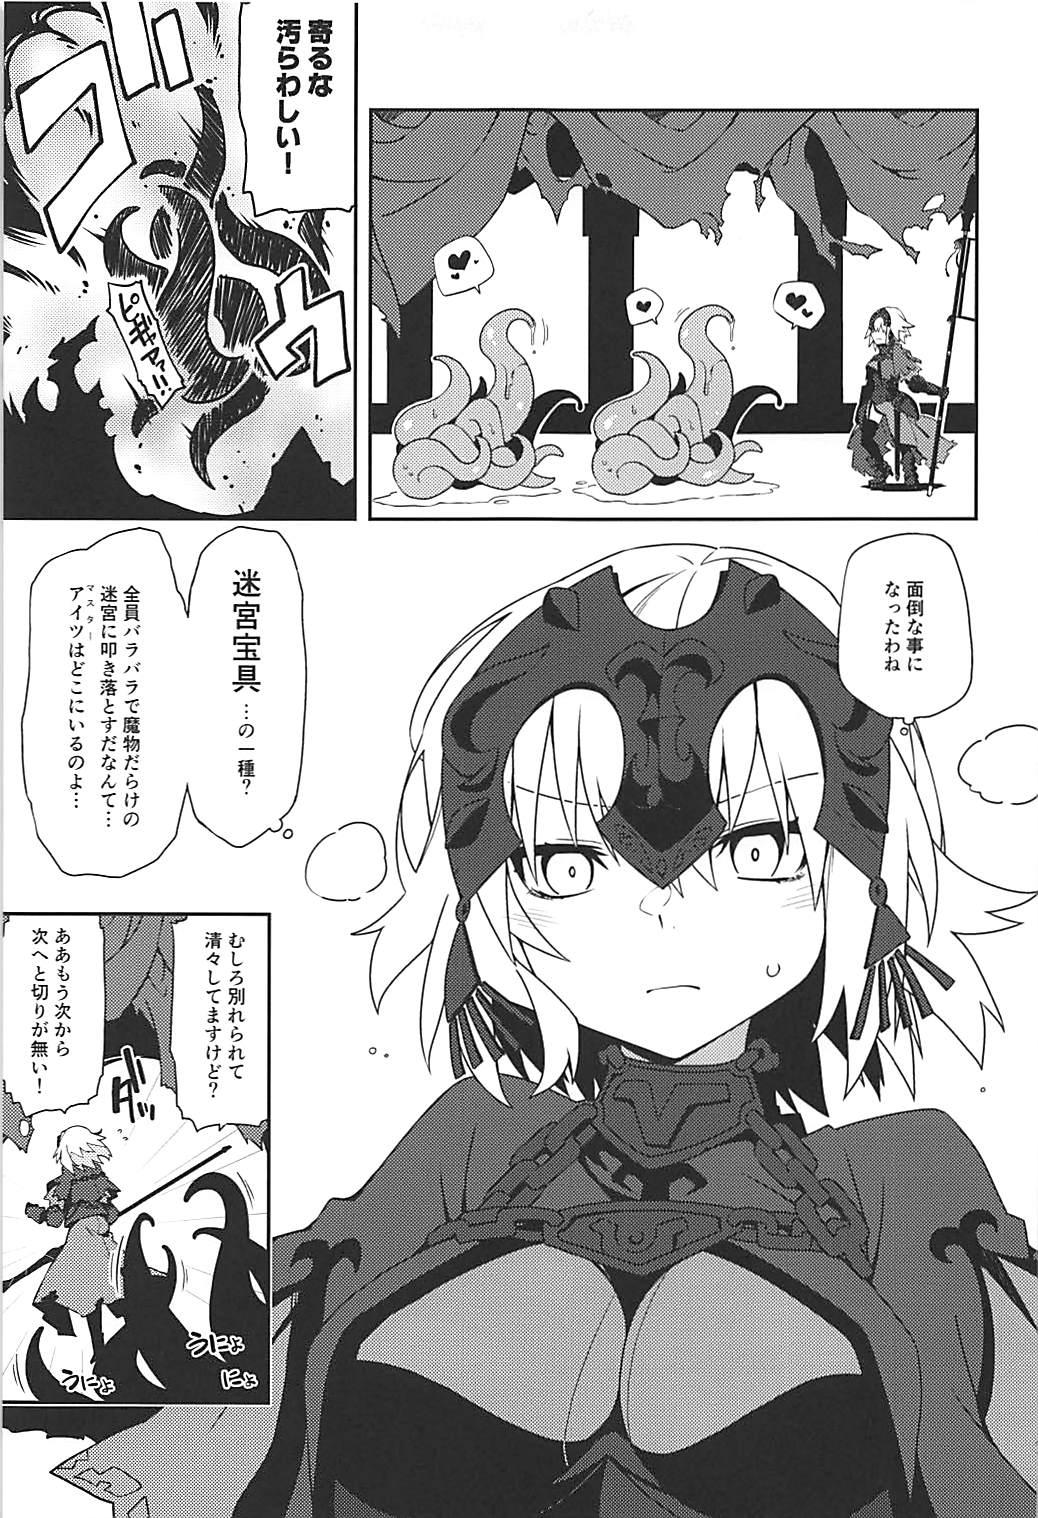 Pendeja Hougu Ero Trap Dungeon - Fate grand order Lesbo - Page 4